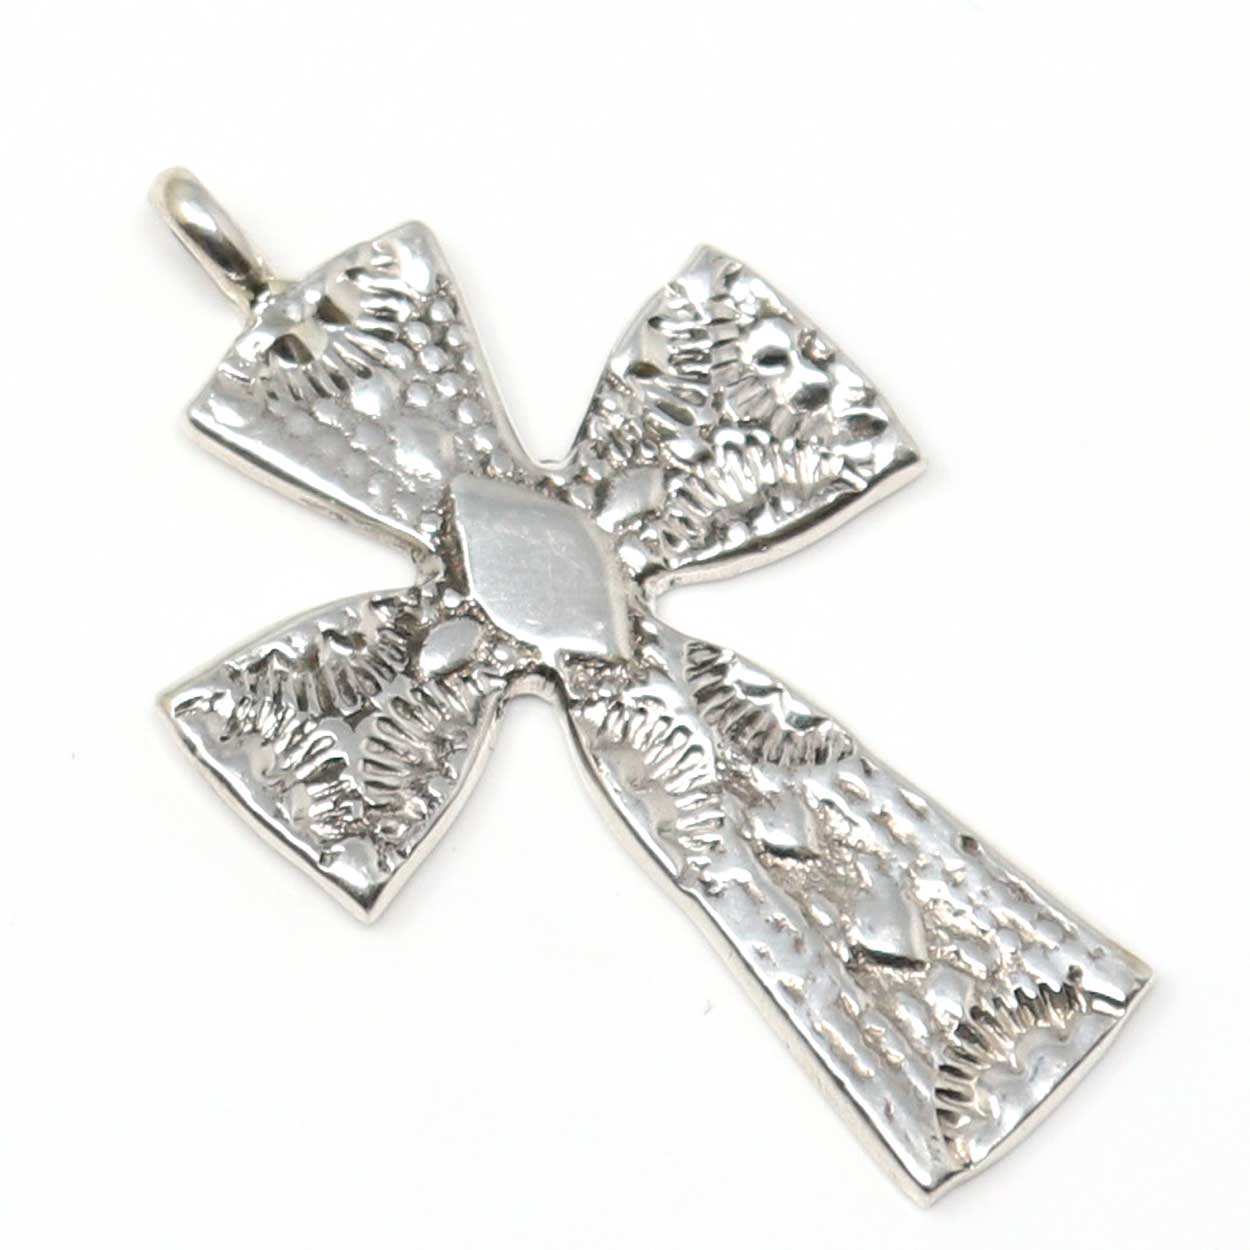 Load image into Gallery viewer, Cast Silver Cross by FL Begay
